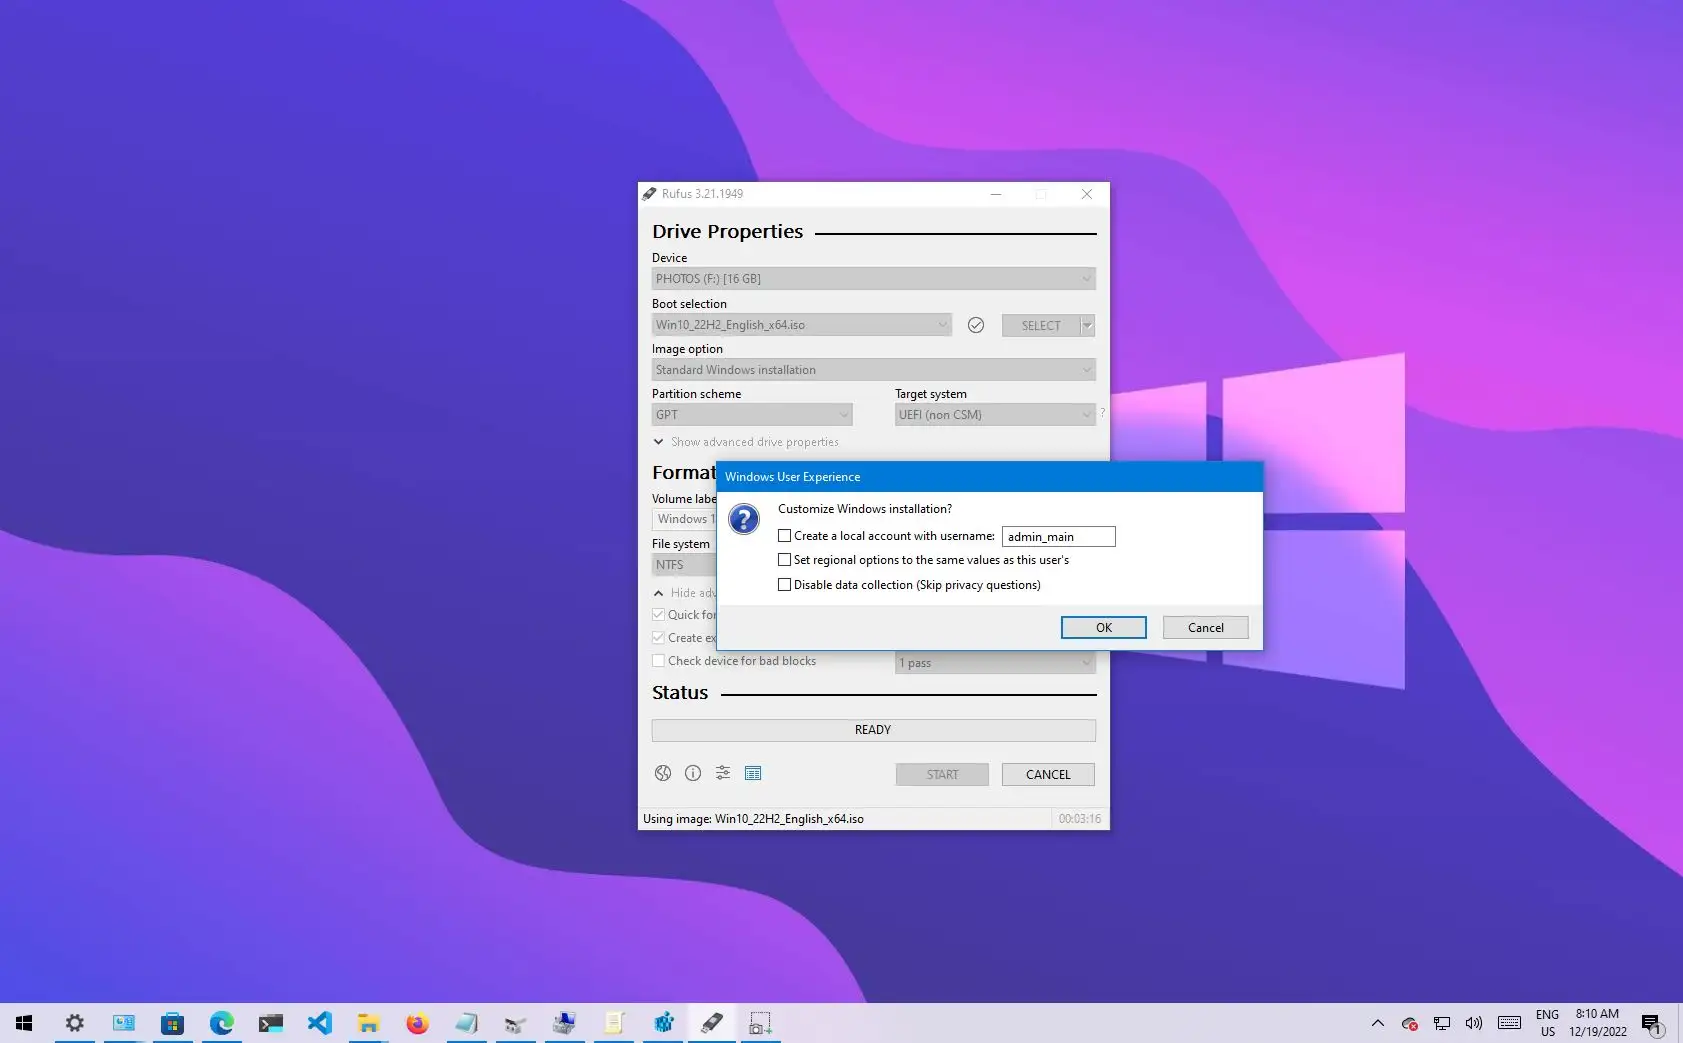 falme Overveje Konfrontere How to download Windows 10 ISO onto USB drive with Rufus - Pureinfotech